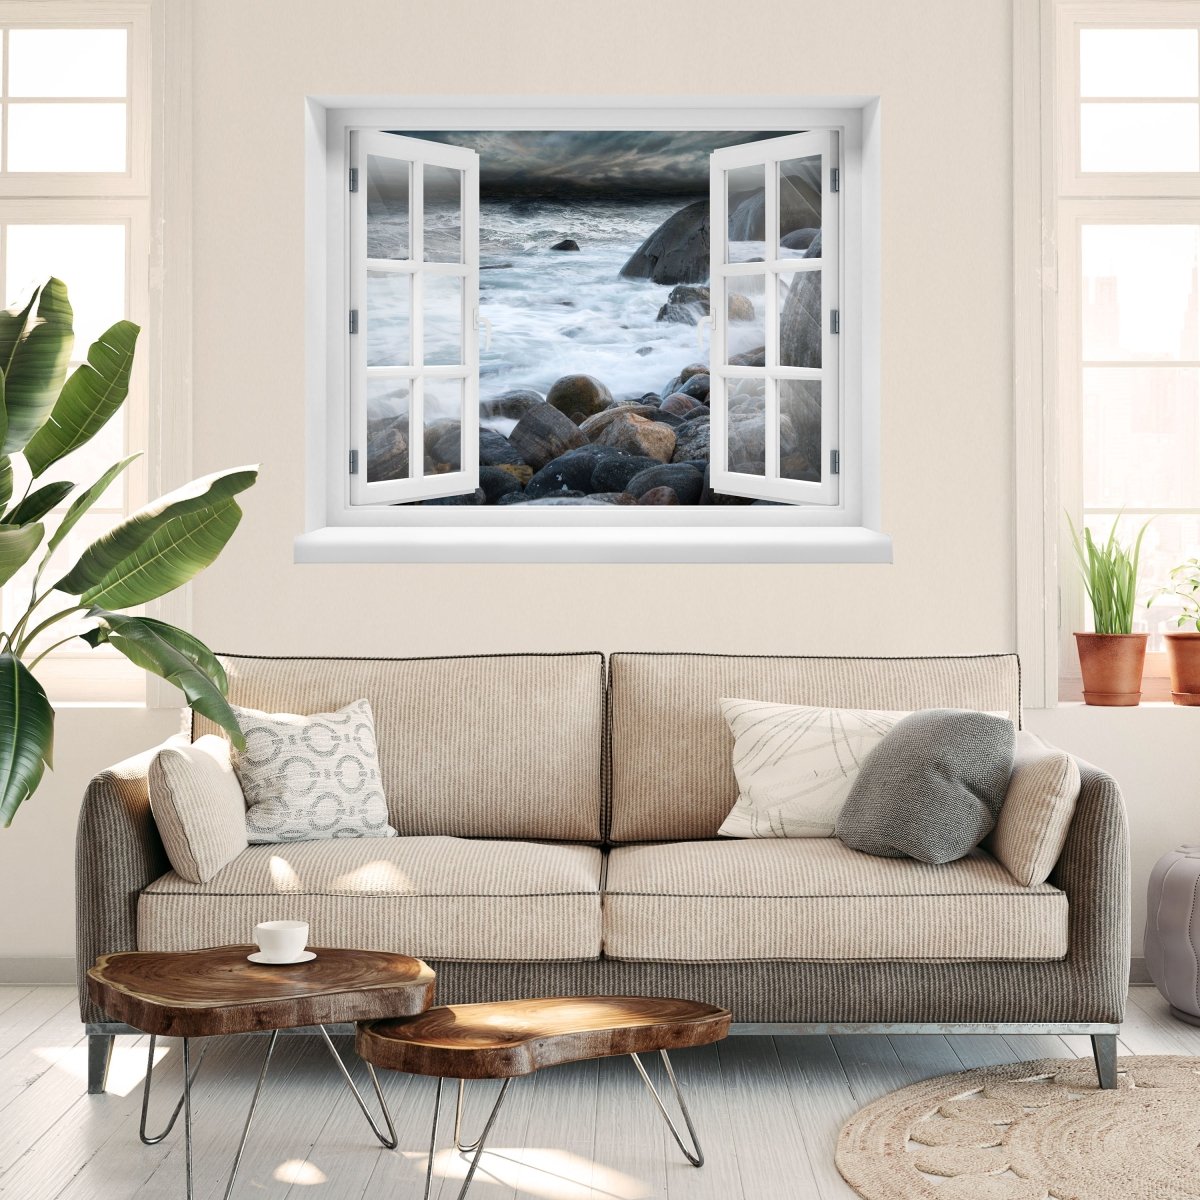 3D wall sticker Stormy weather in Alnes, Giske - Wall decal M1042